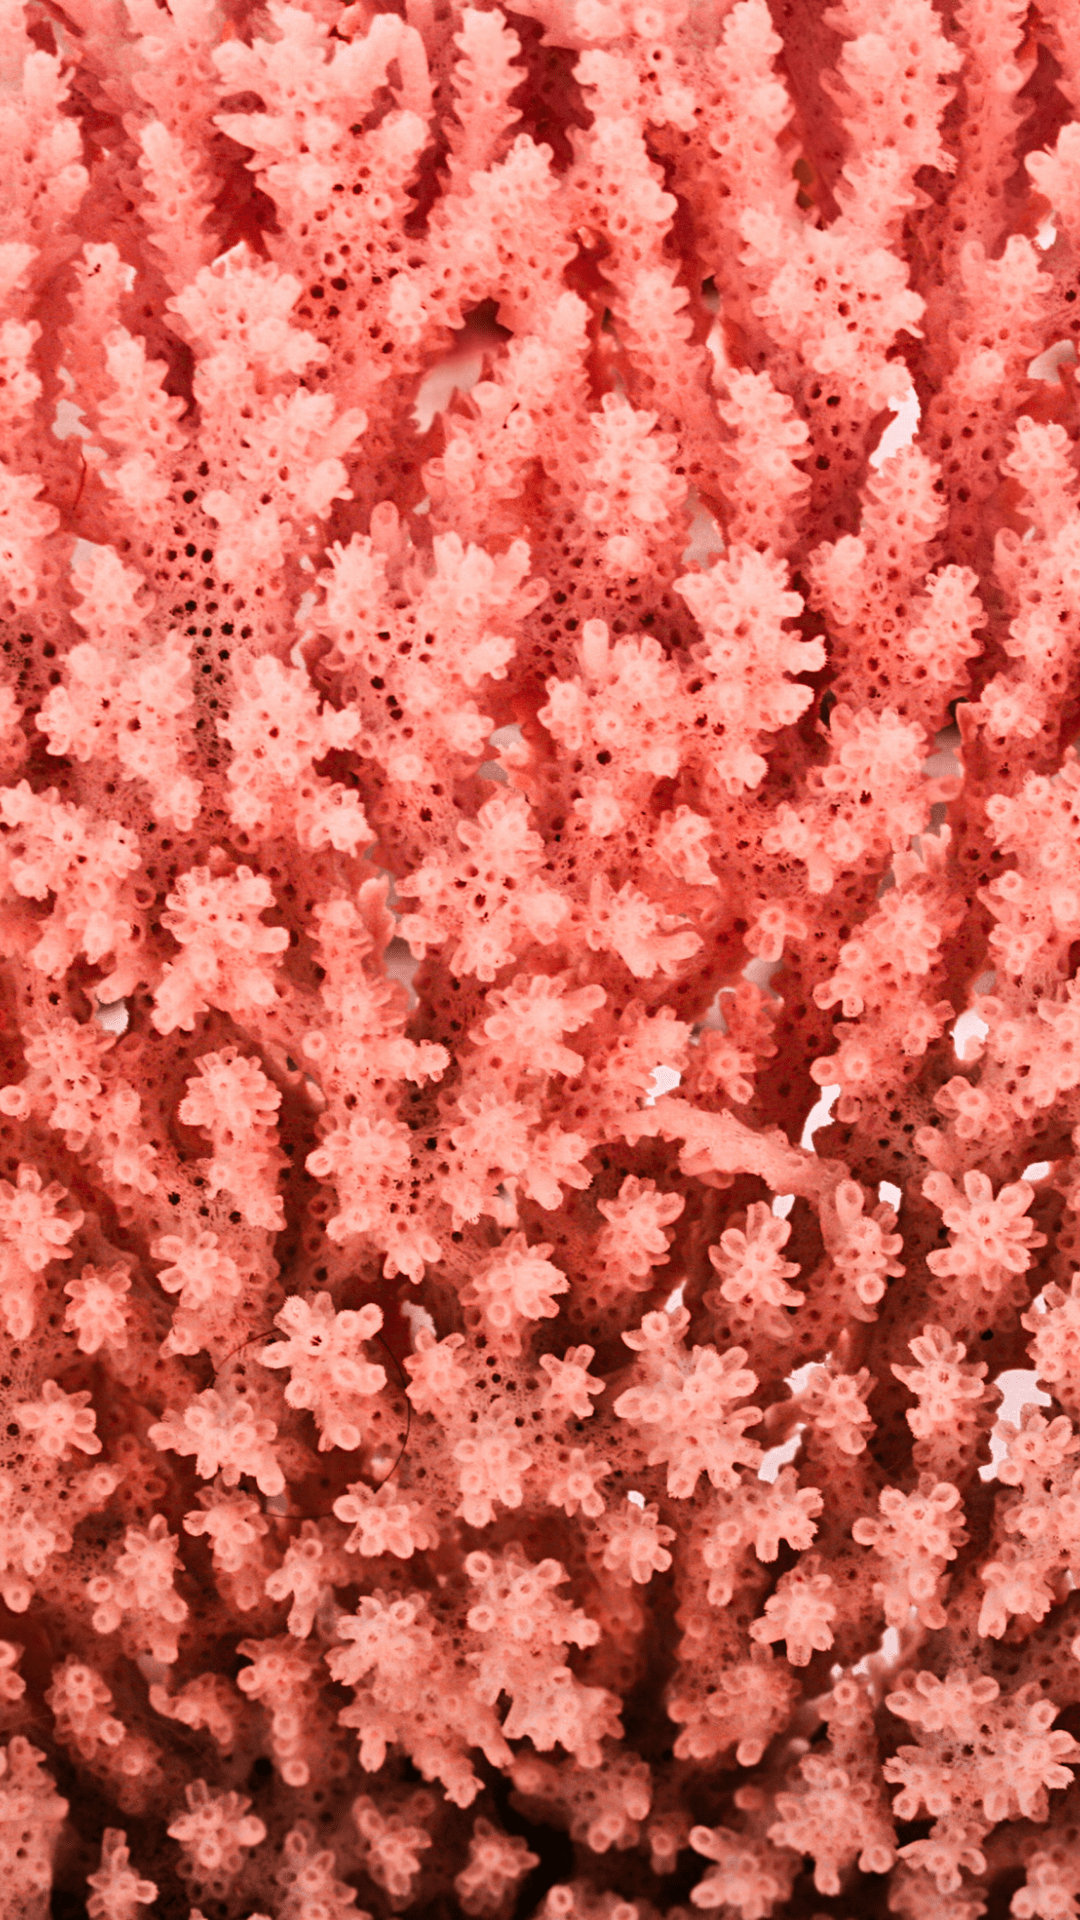 Colorful Coral Wallpaper Download. Coral wallpaper, Peach aesthetic, Coral reef